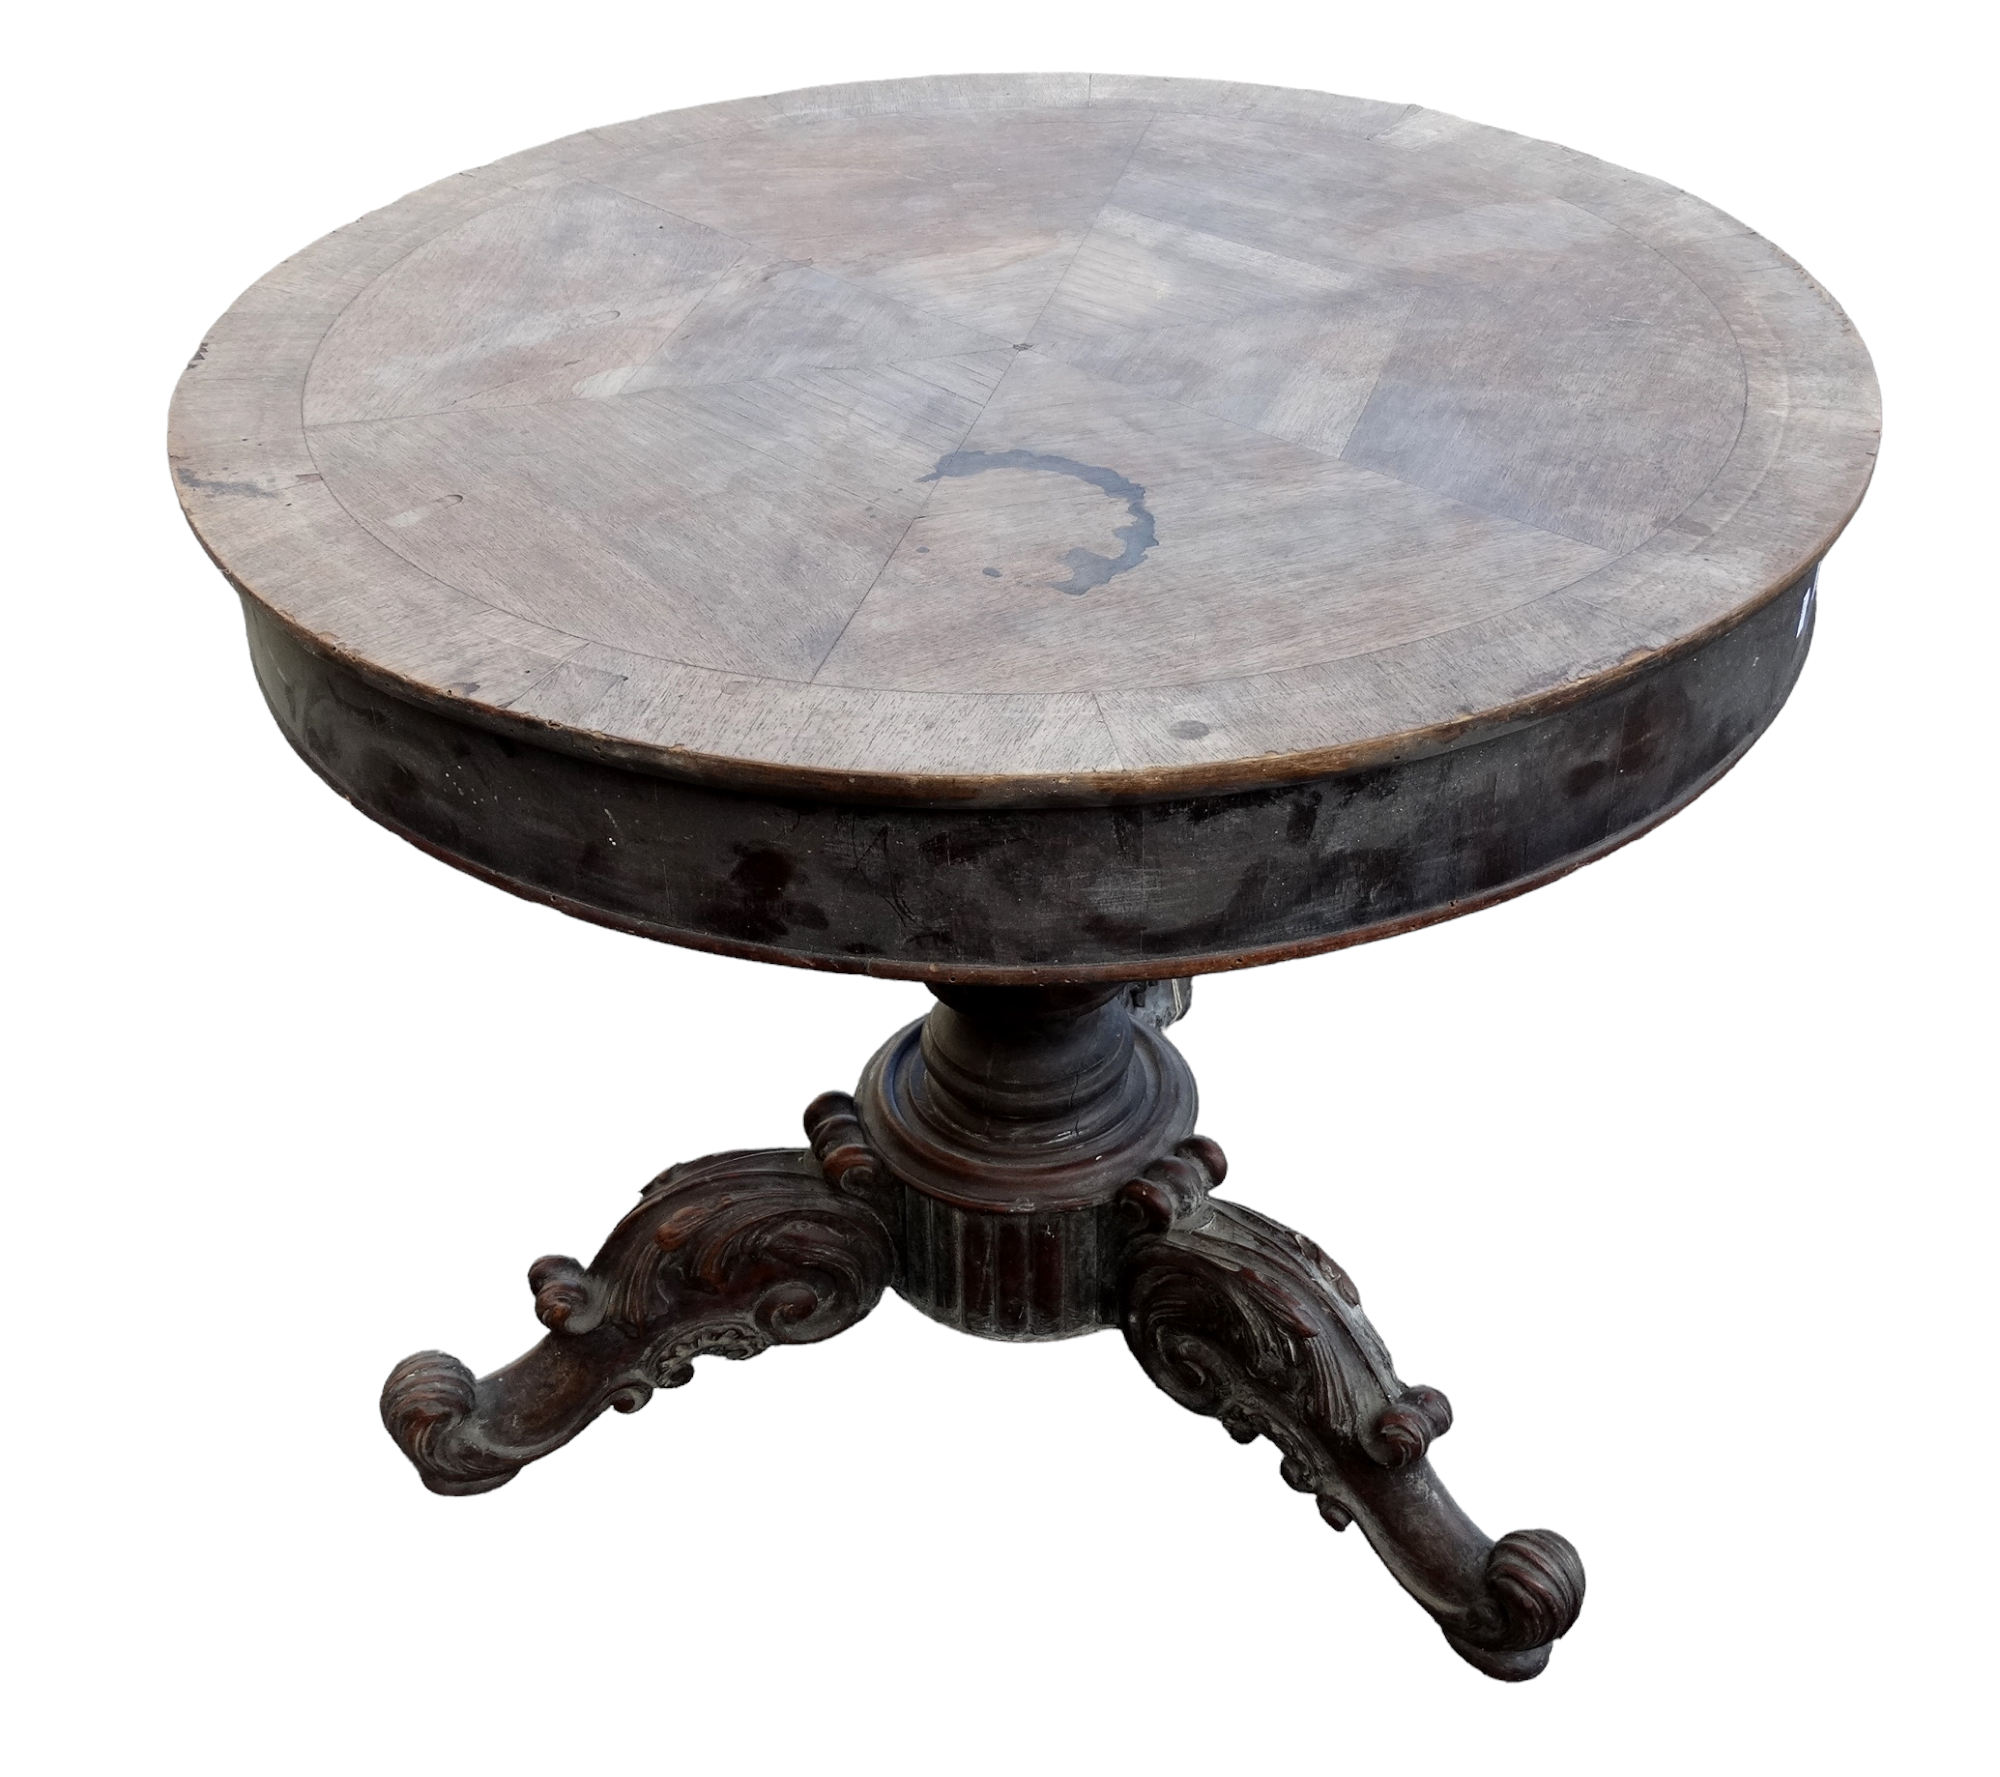 A 19th century French walnut circular pedestal table - the segmented veneered top above a central